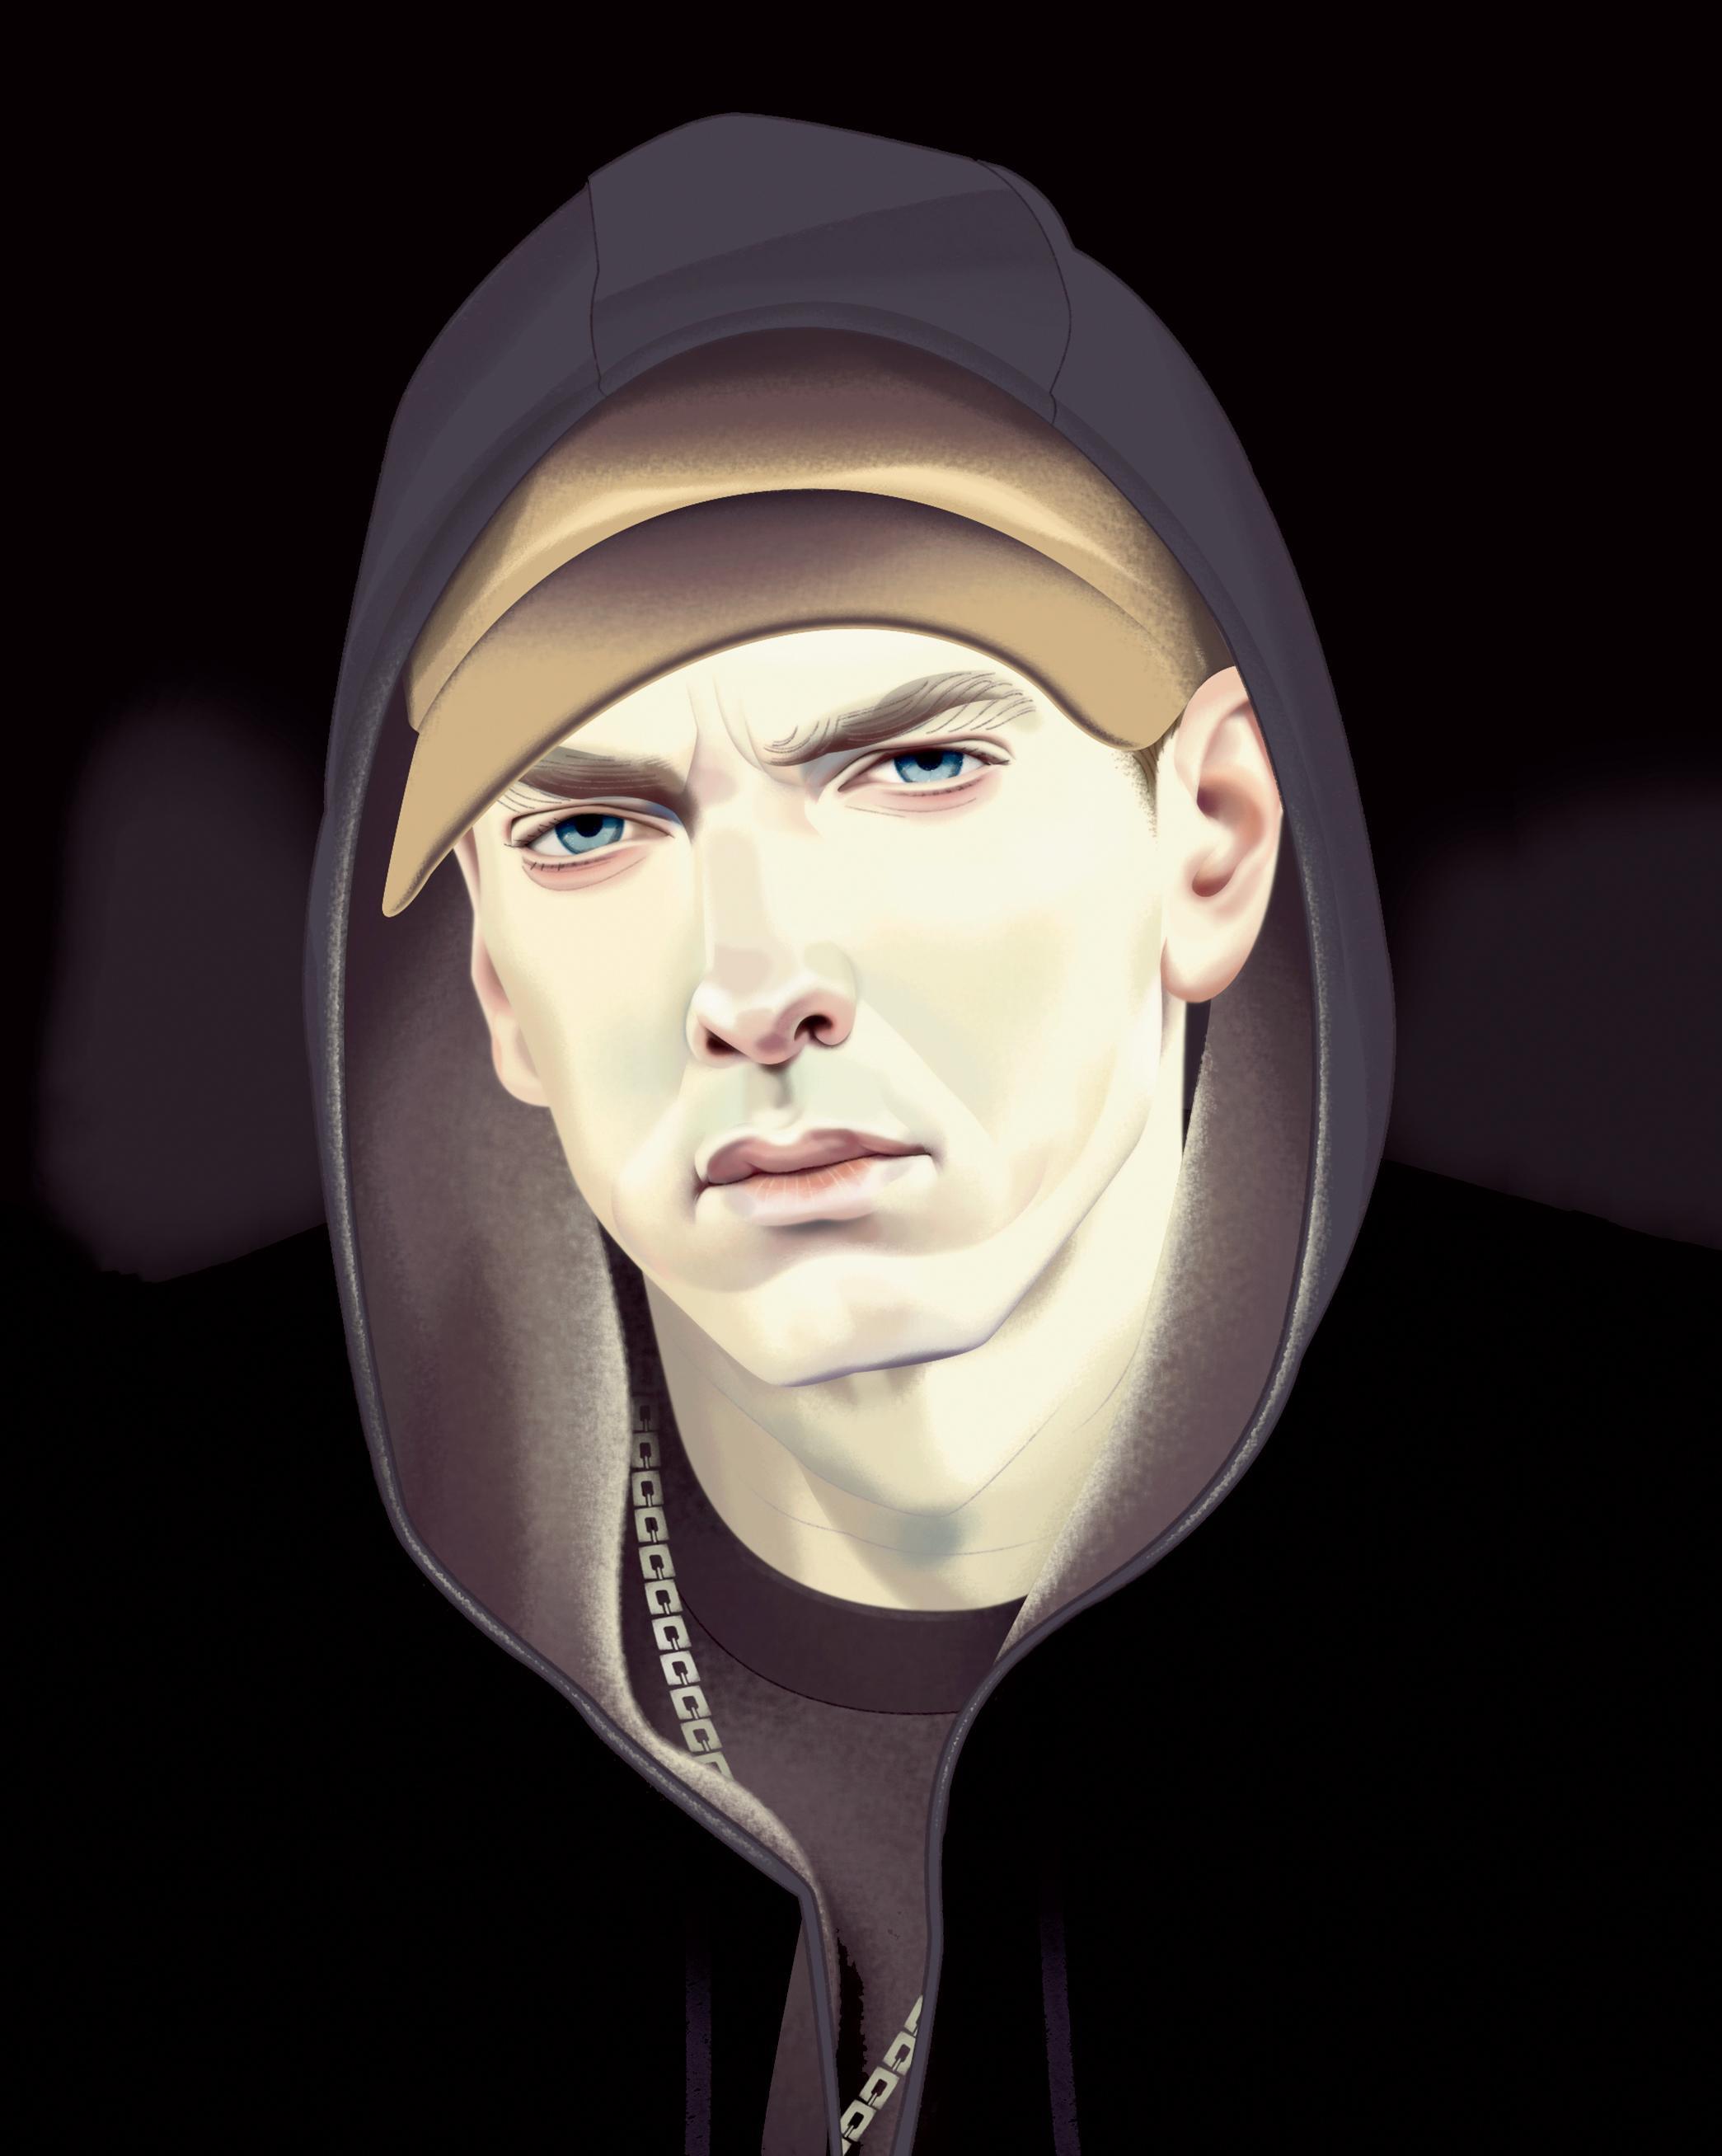 Eminem 'Revival' Review: Raw, Honest, Compelling as Ever